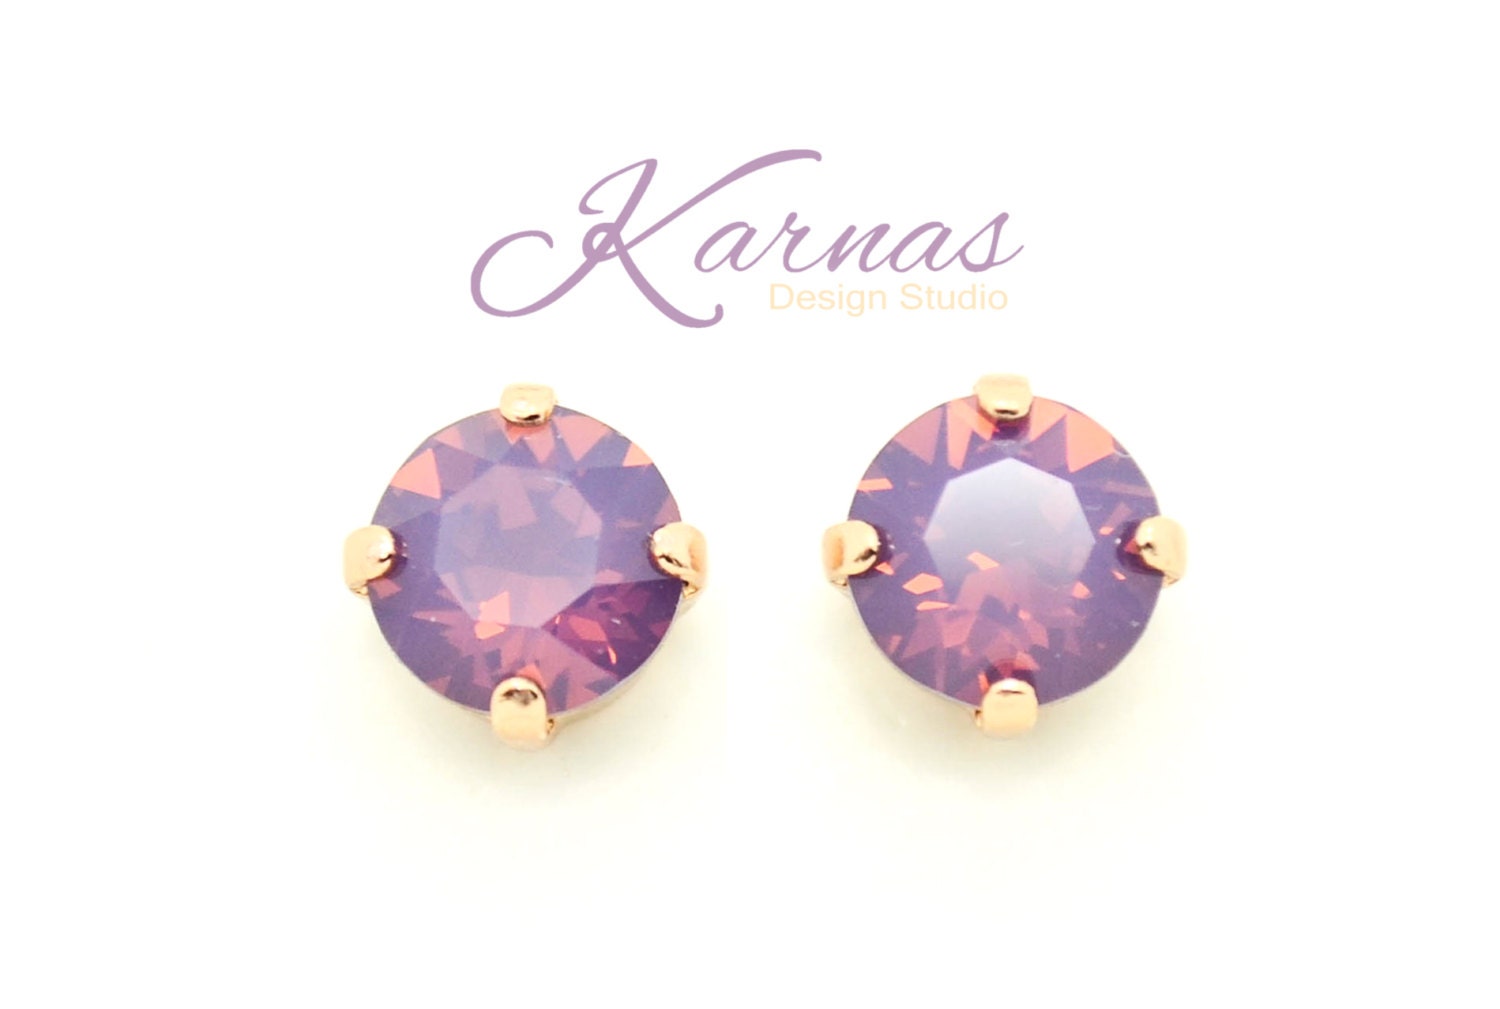 Raspberry Opal 8mm Stud Or Drop Earrings Made With K.d.s. Premium Crystal Choose Your Finish Karnas Design Studio Free Shipping